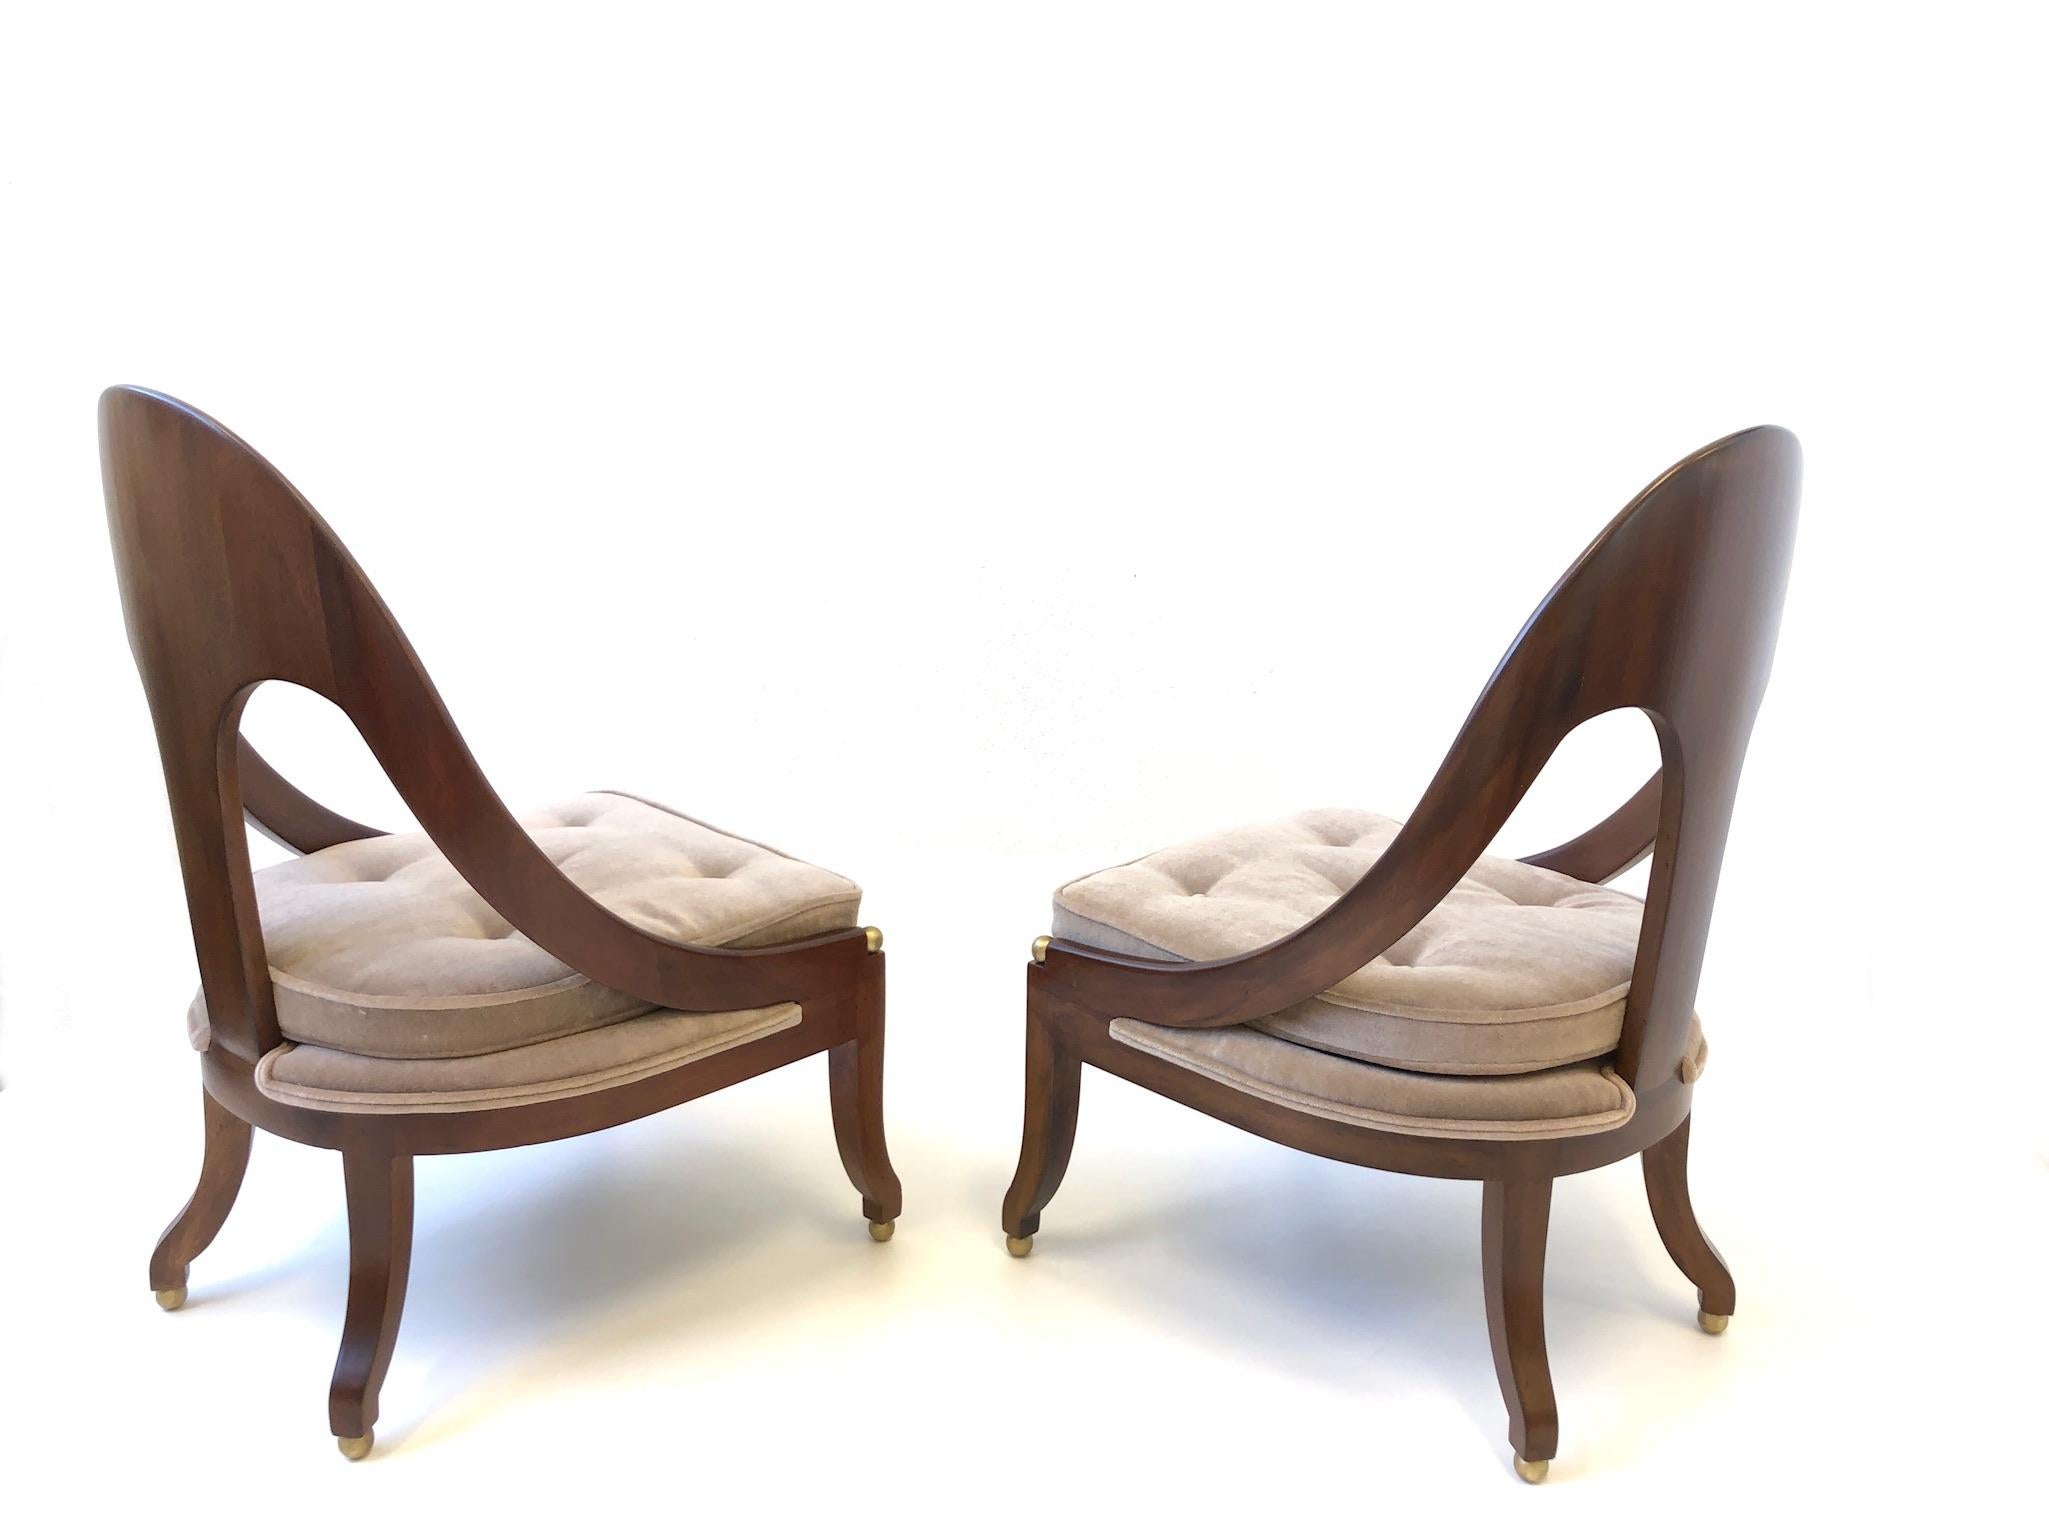 American Pair of Mahogany Spoon Back Slipper Lounge Chairs by Michael Taylor for Baker